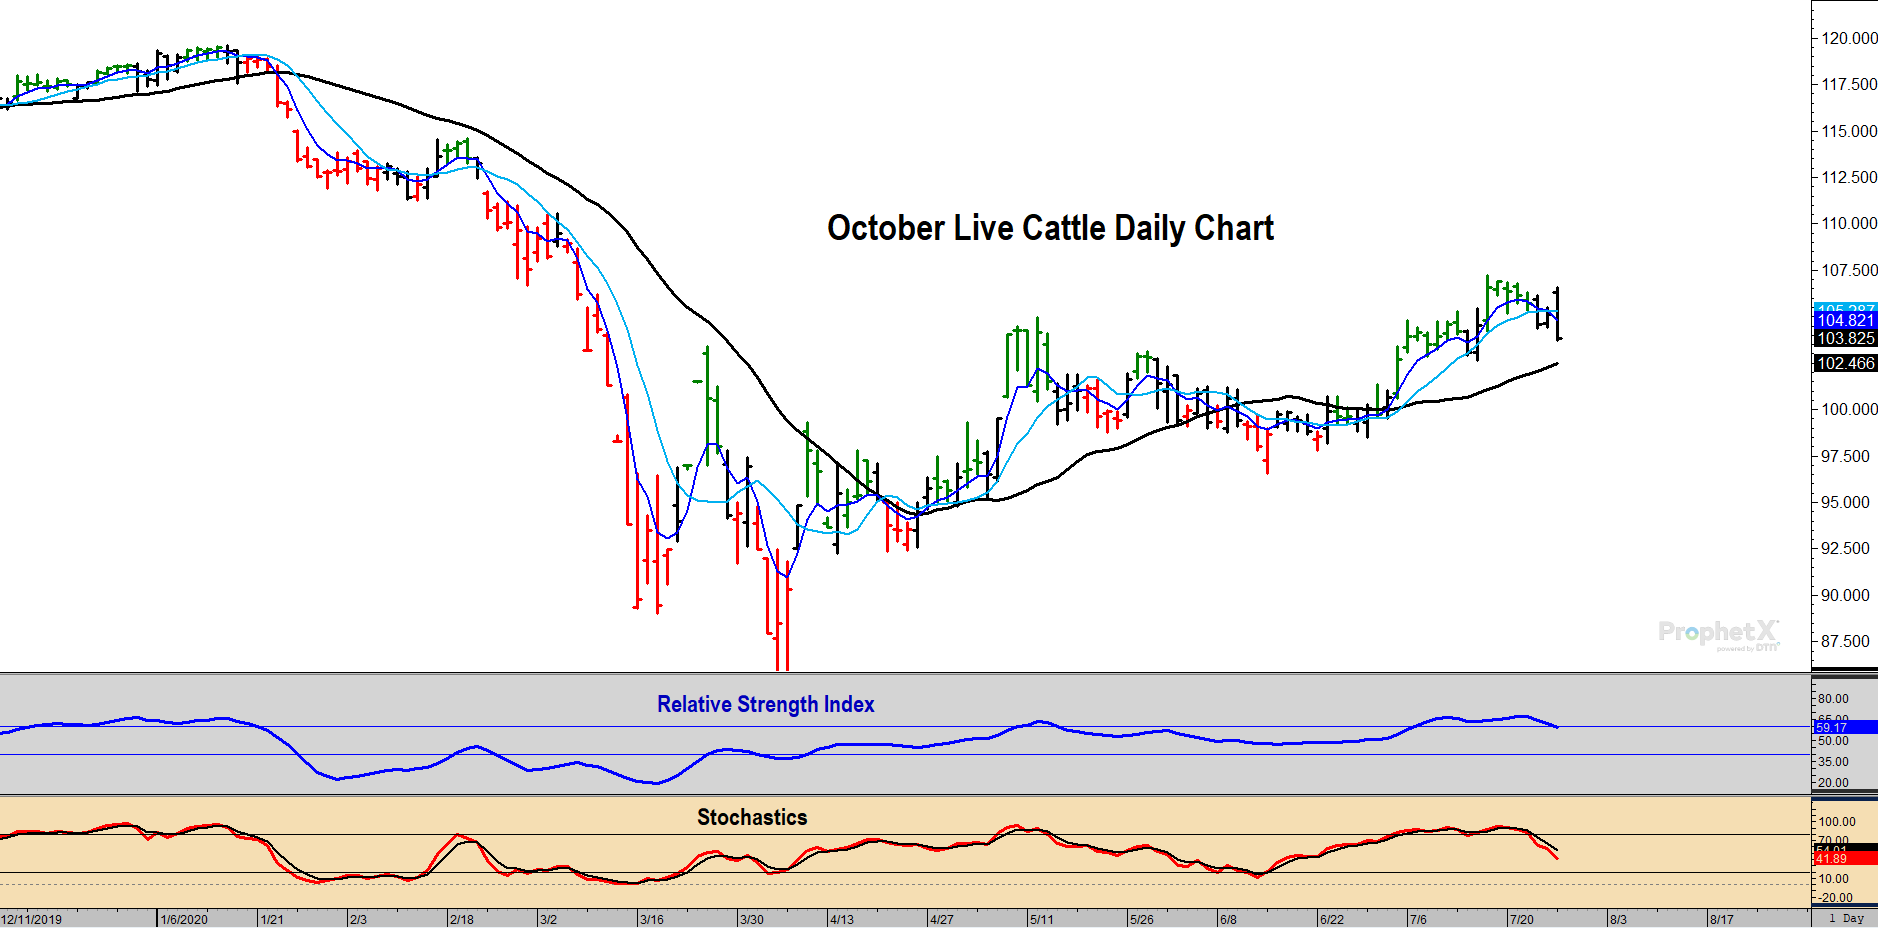 October Live Cattle Daily Chart